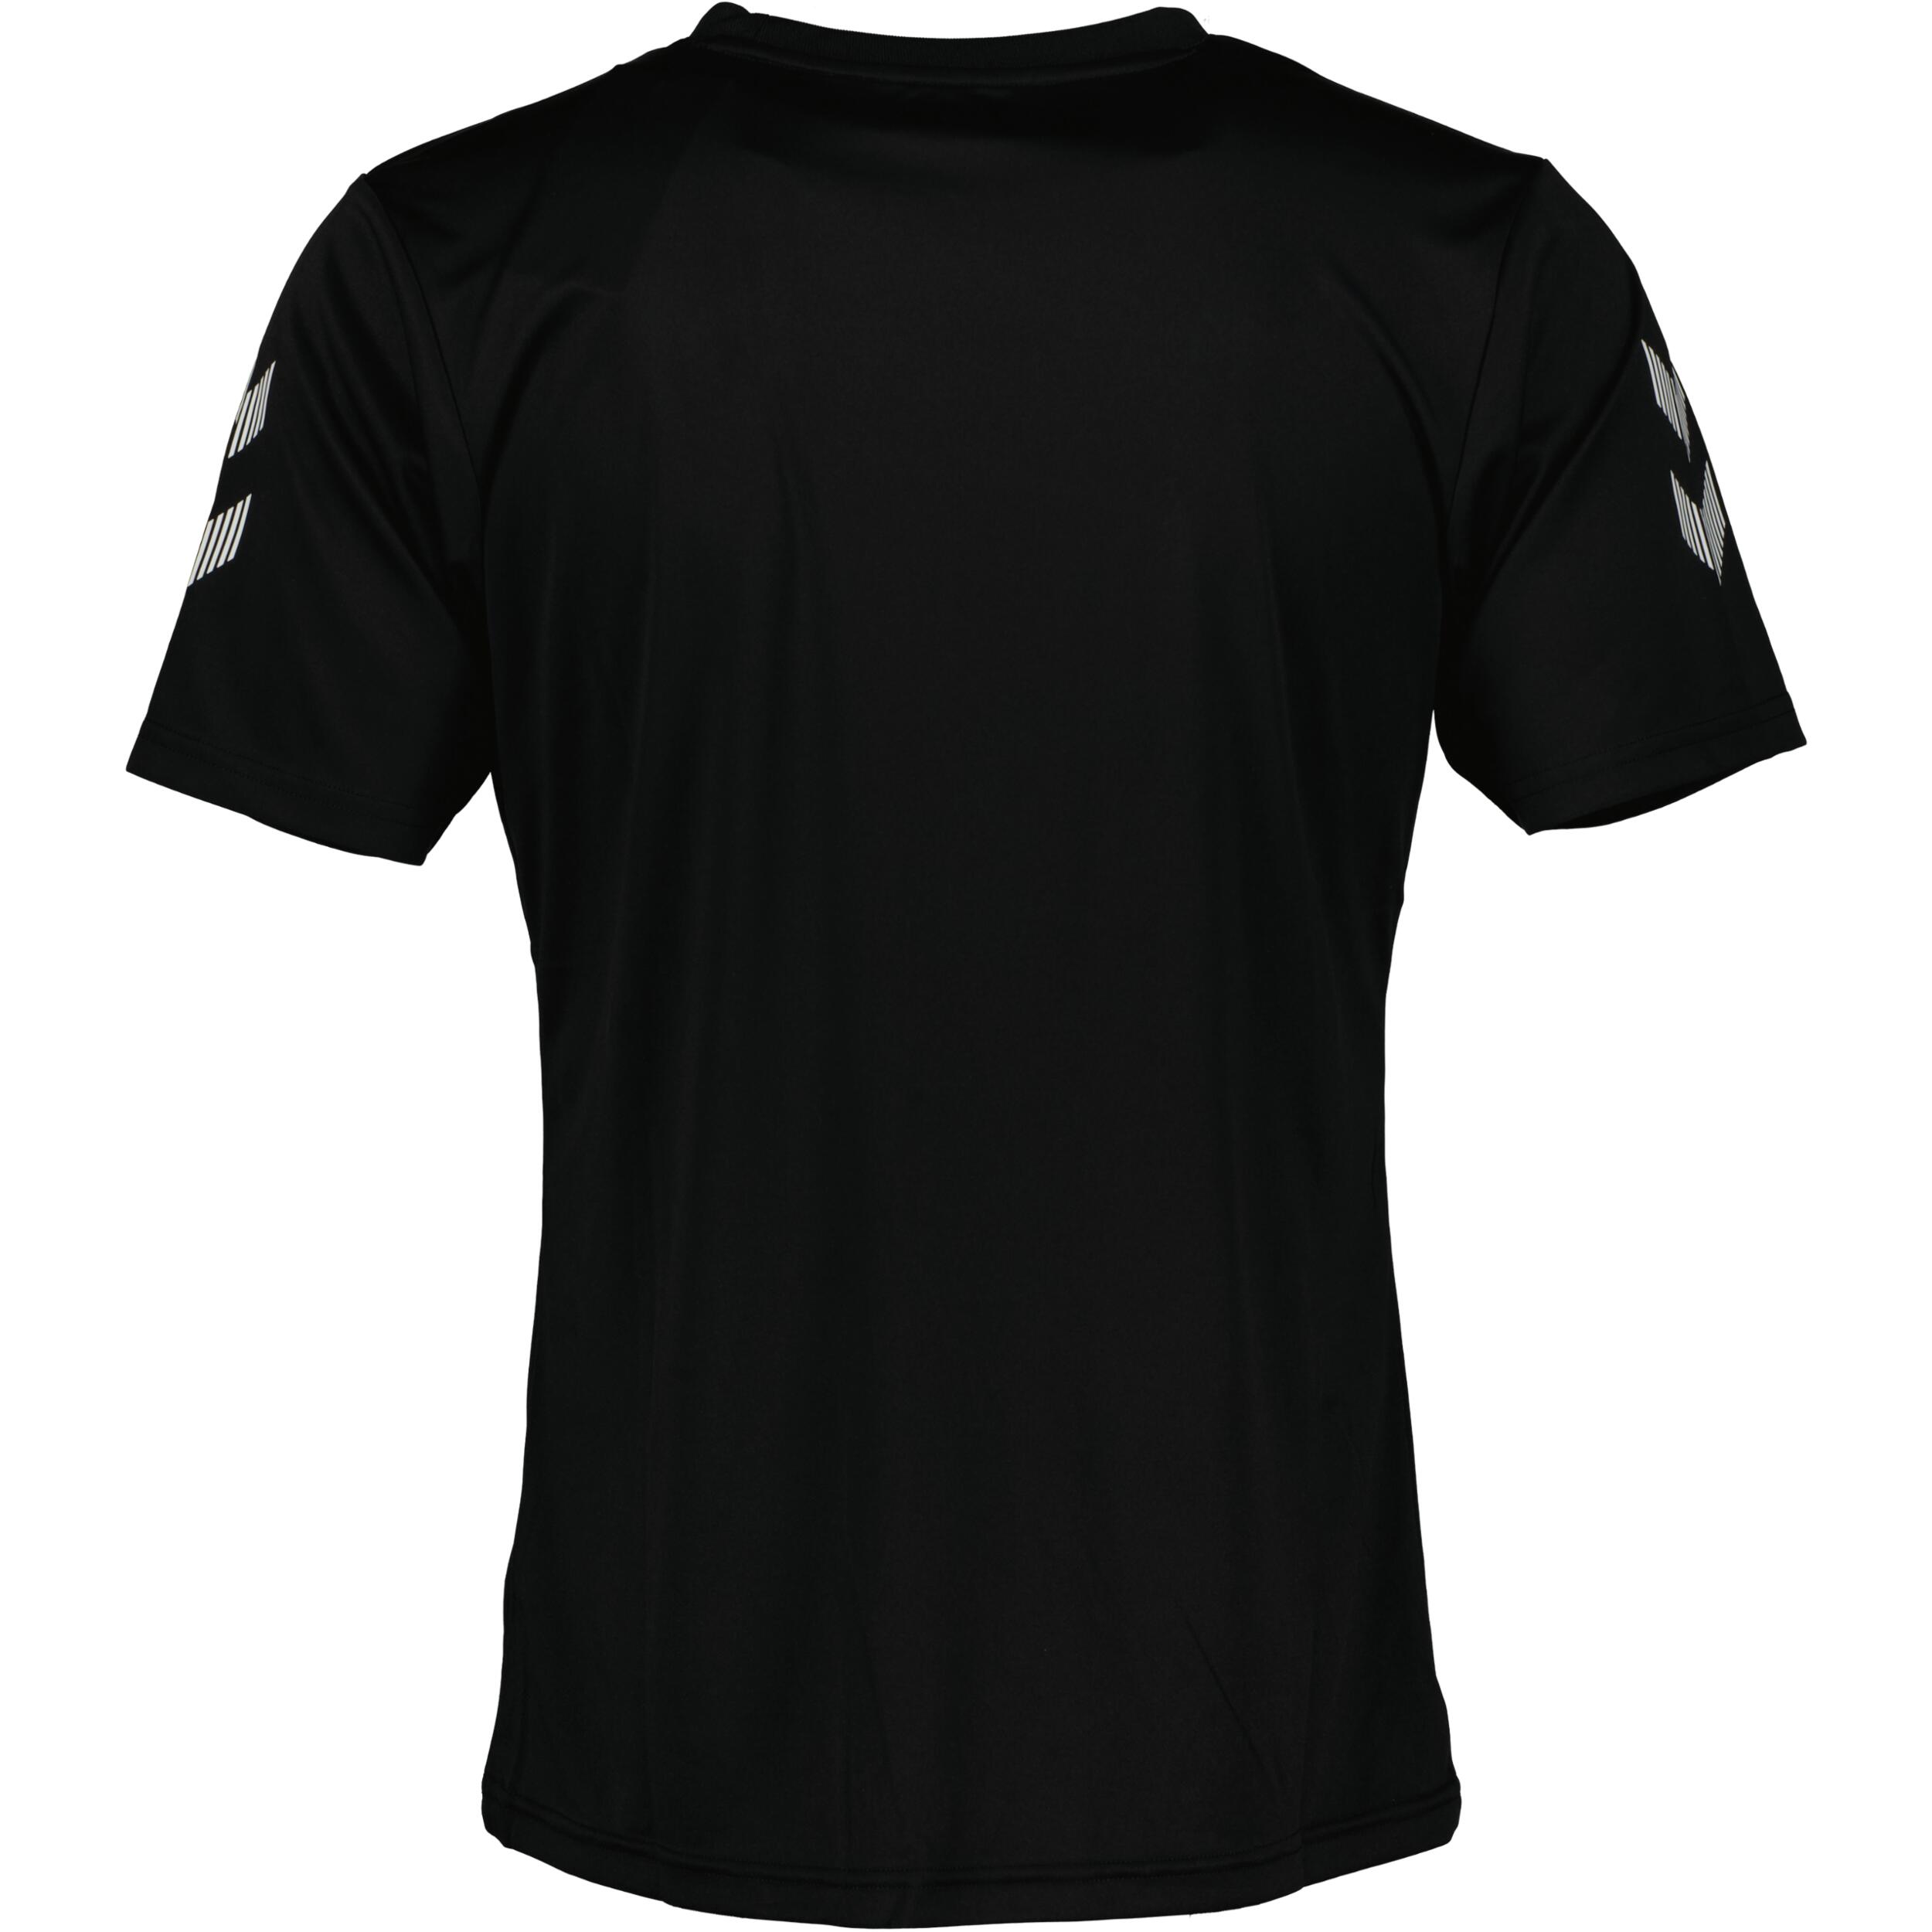 Solo jersey for men, great for football, in black 2/3